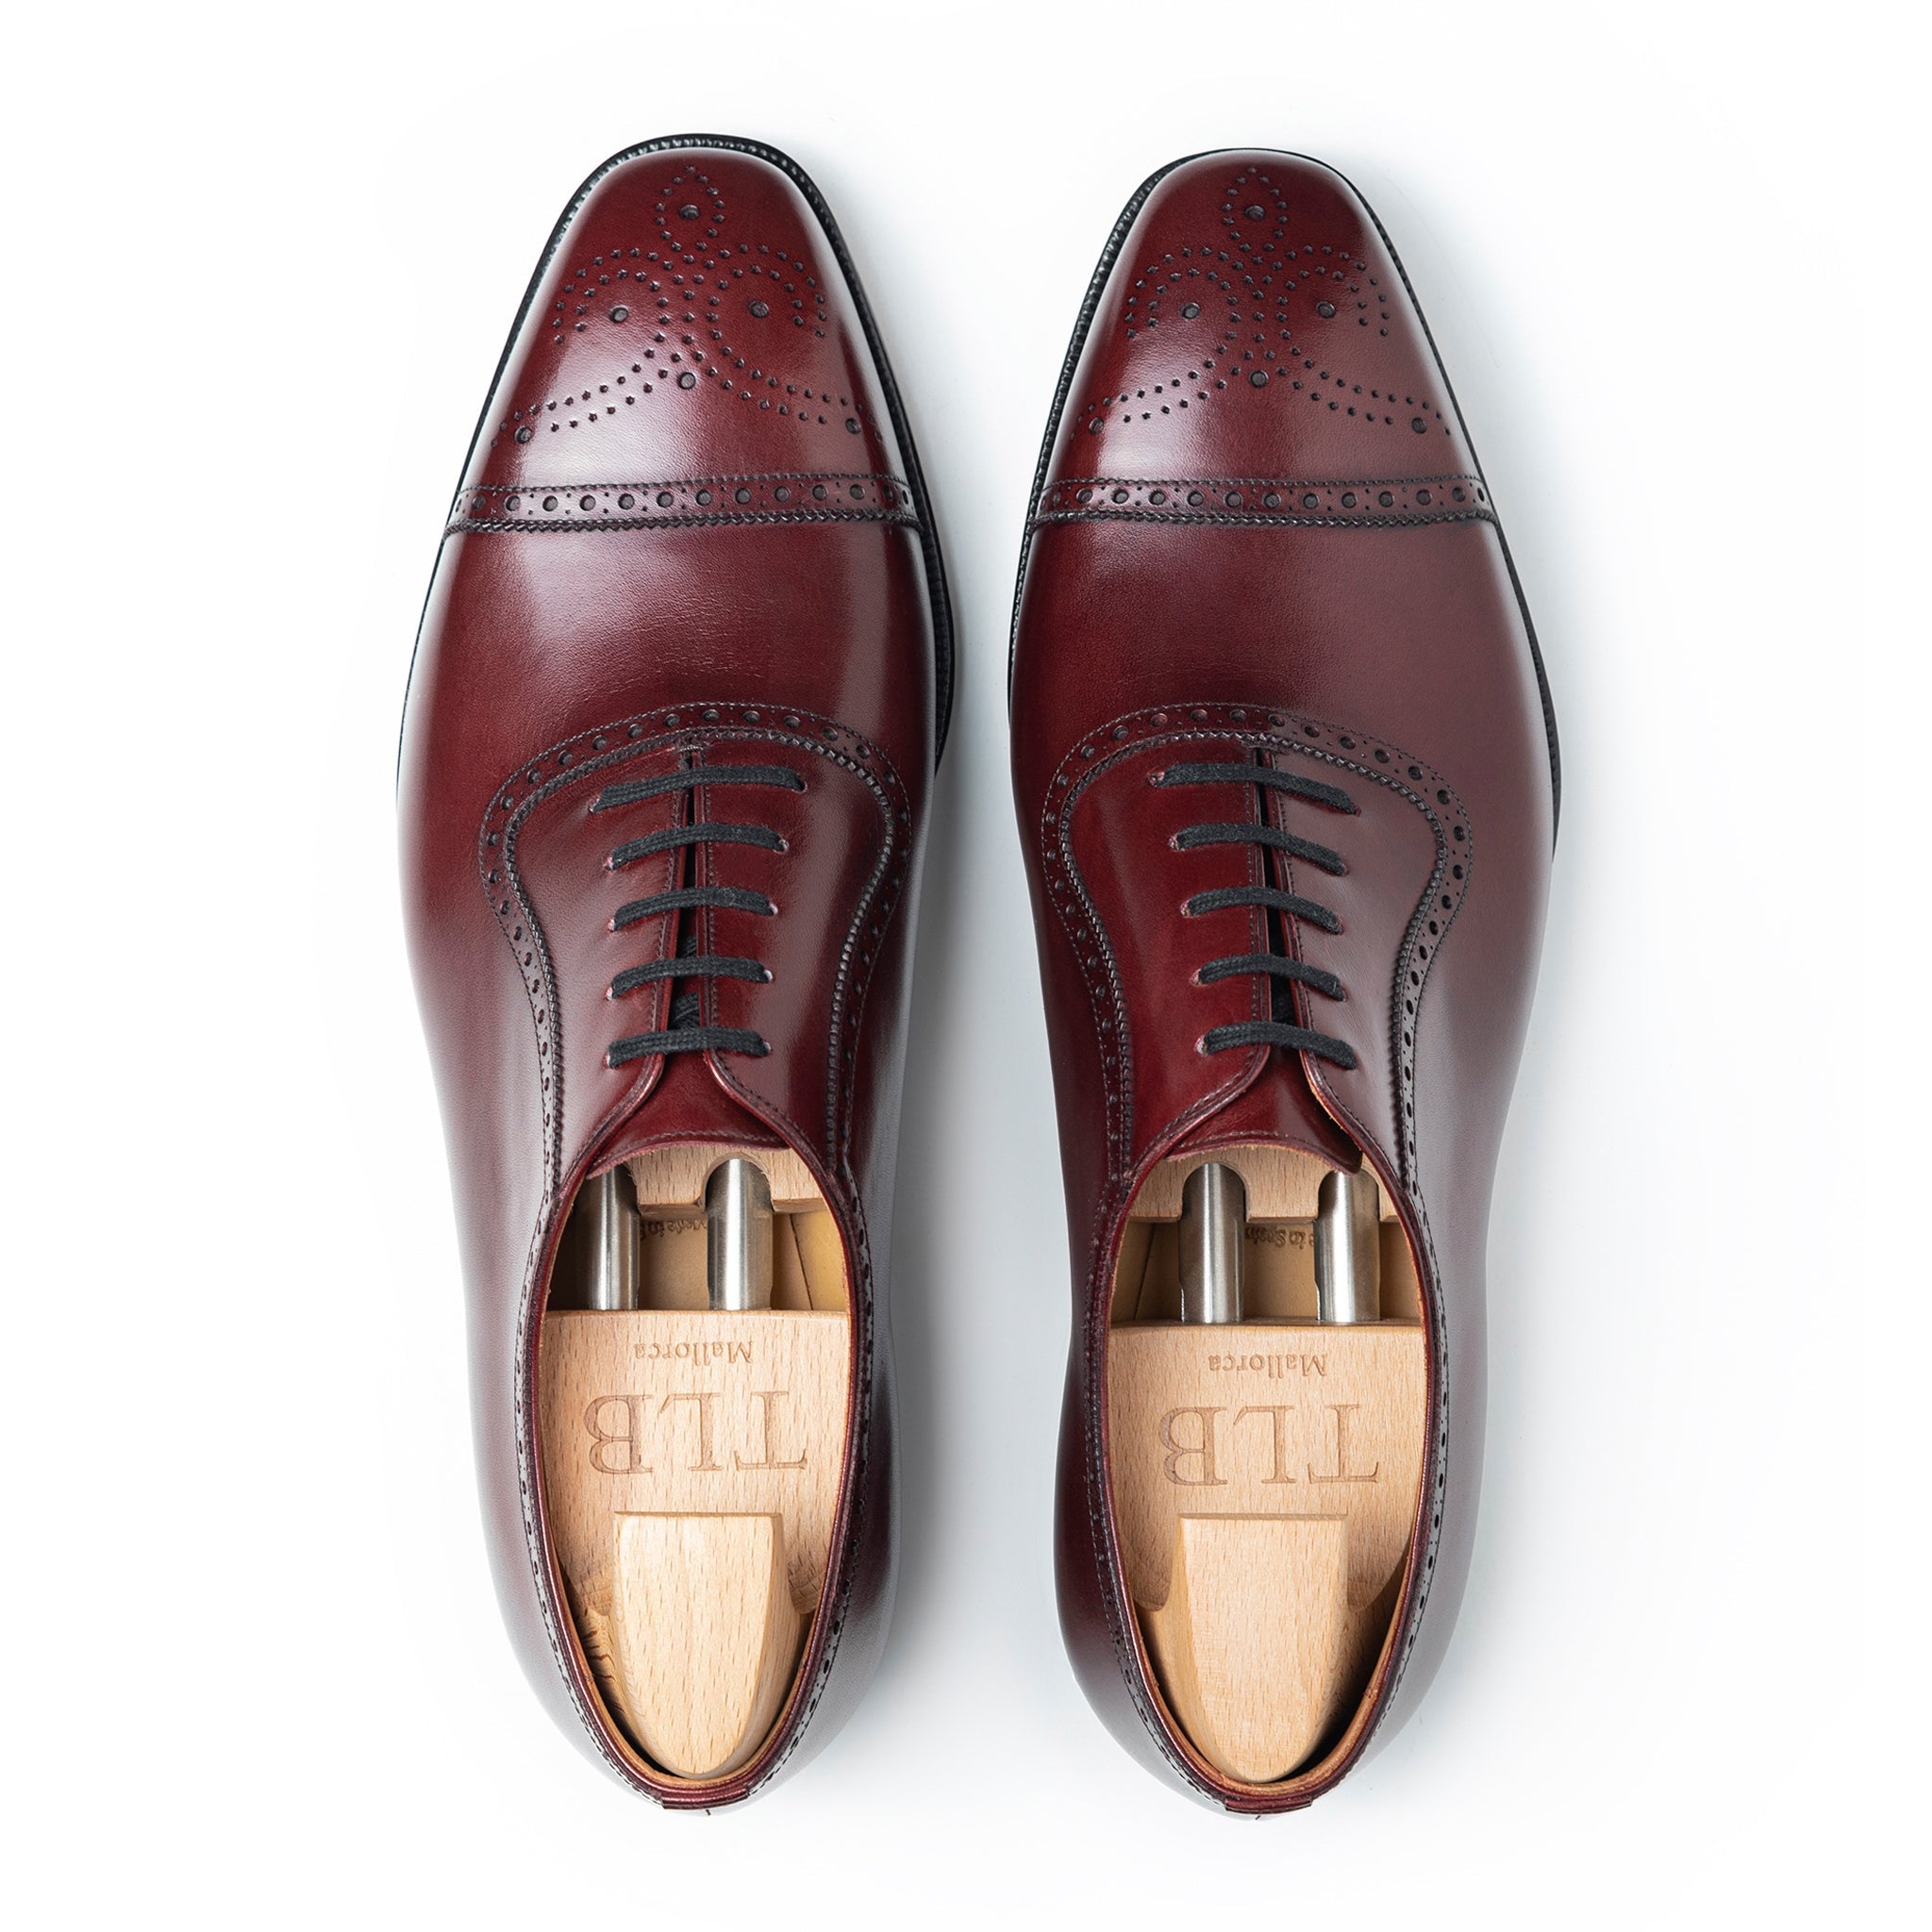 TLB Mallorca | Men's leather shoes | Oxford Shoes Artista 